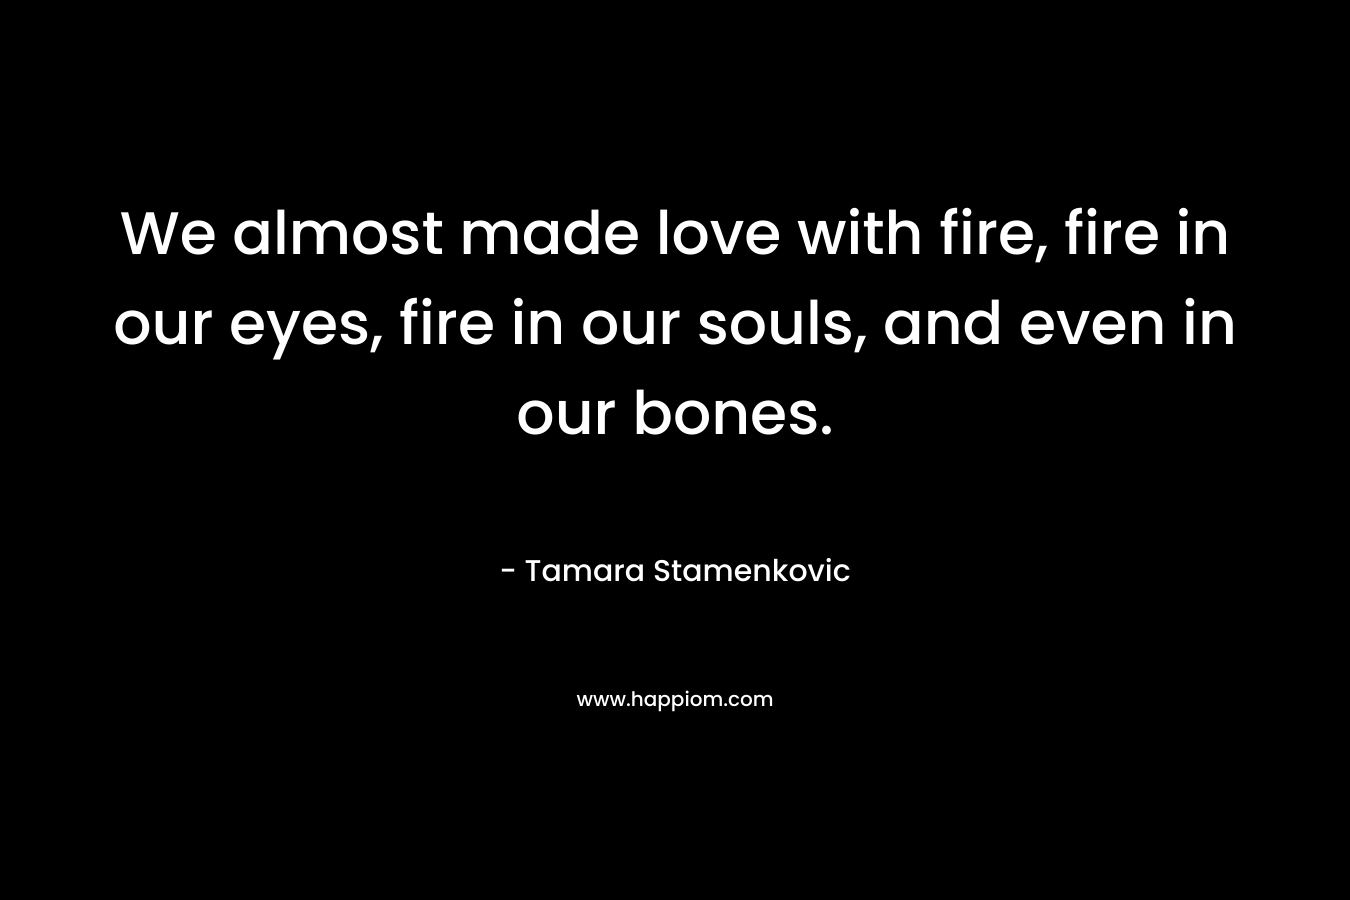 We almost made love with fire, fire in our eyes, fire in our souls, and even in our bones.